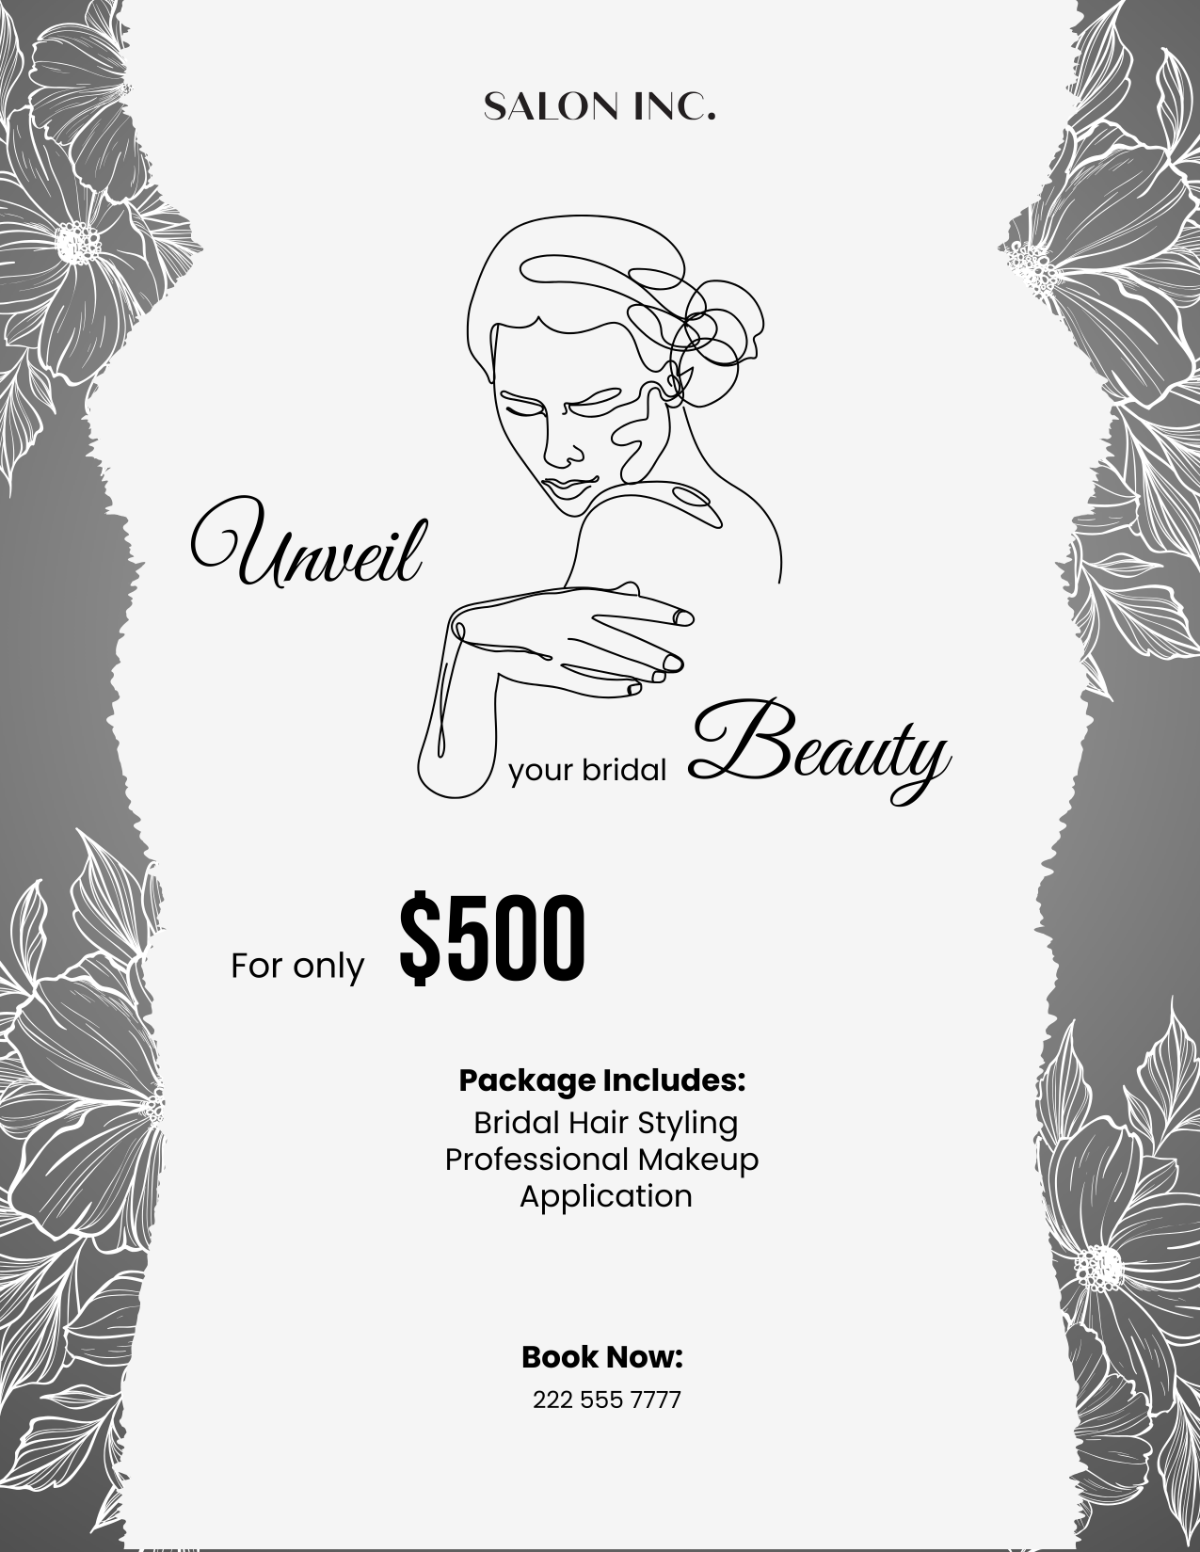 Free Salon Bridal Package Flyer Template